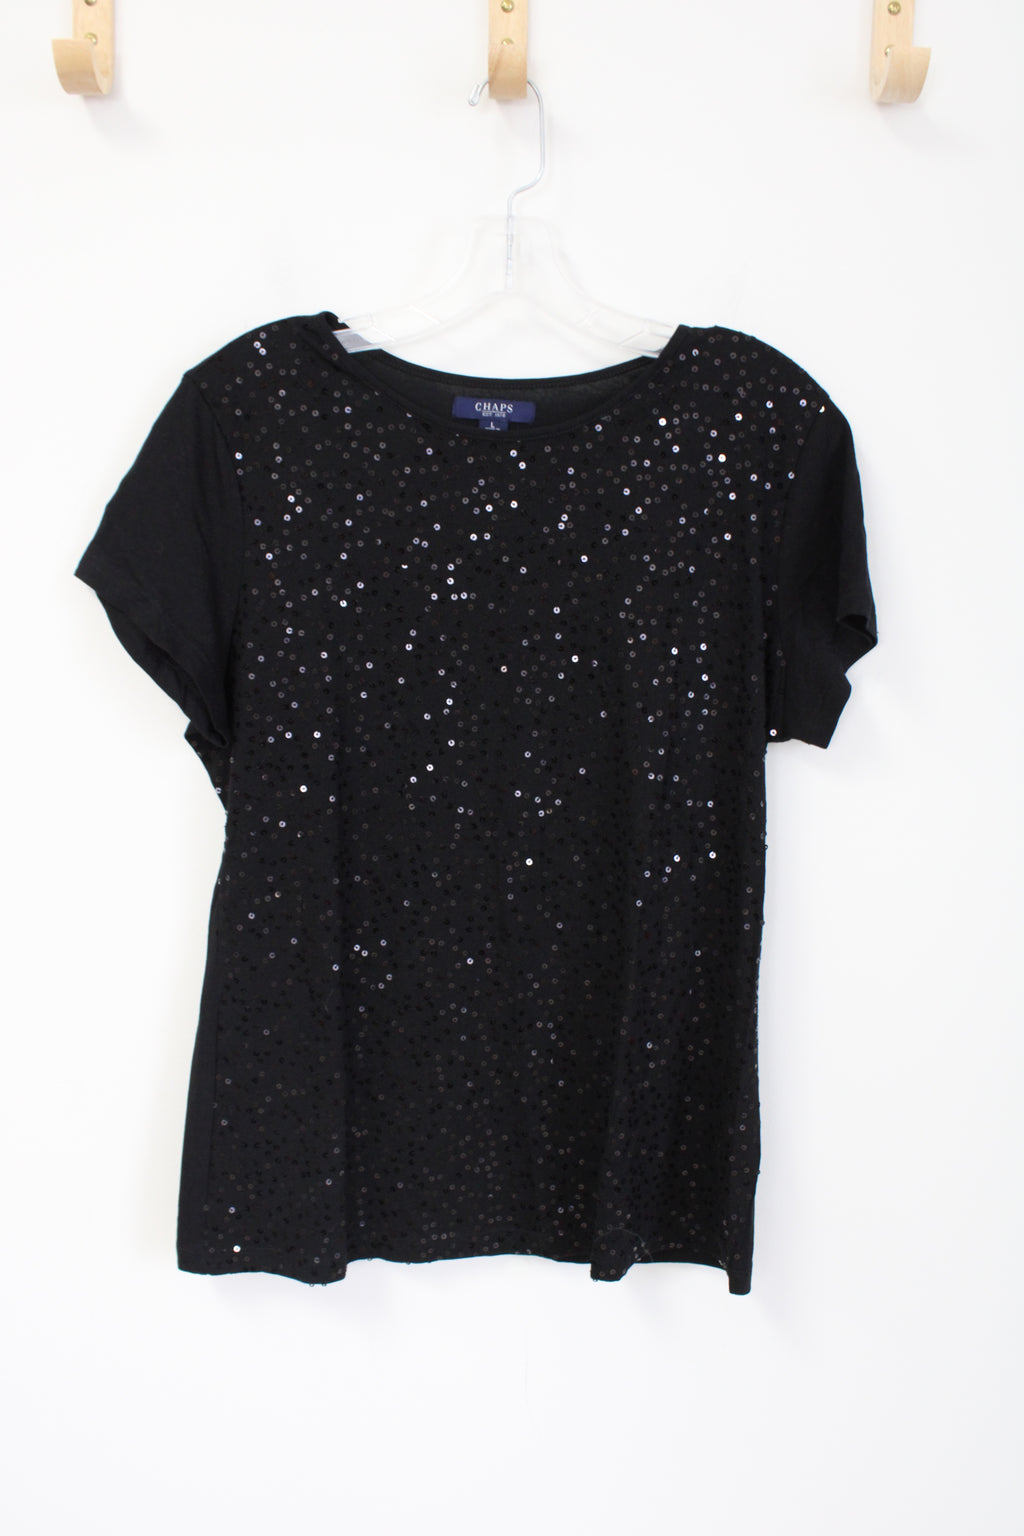 Chaps Black Sequined Tee | L